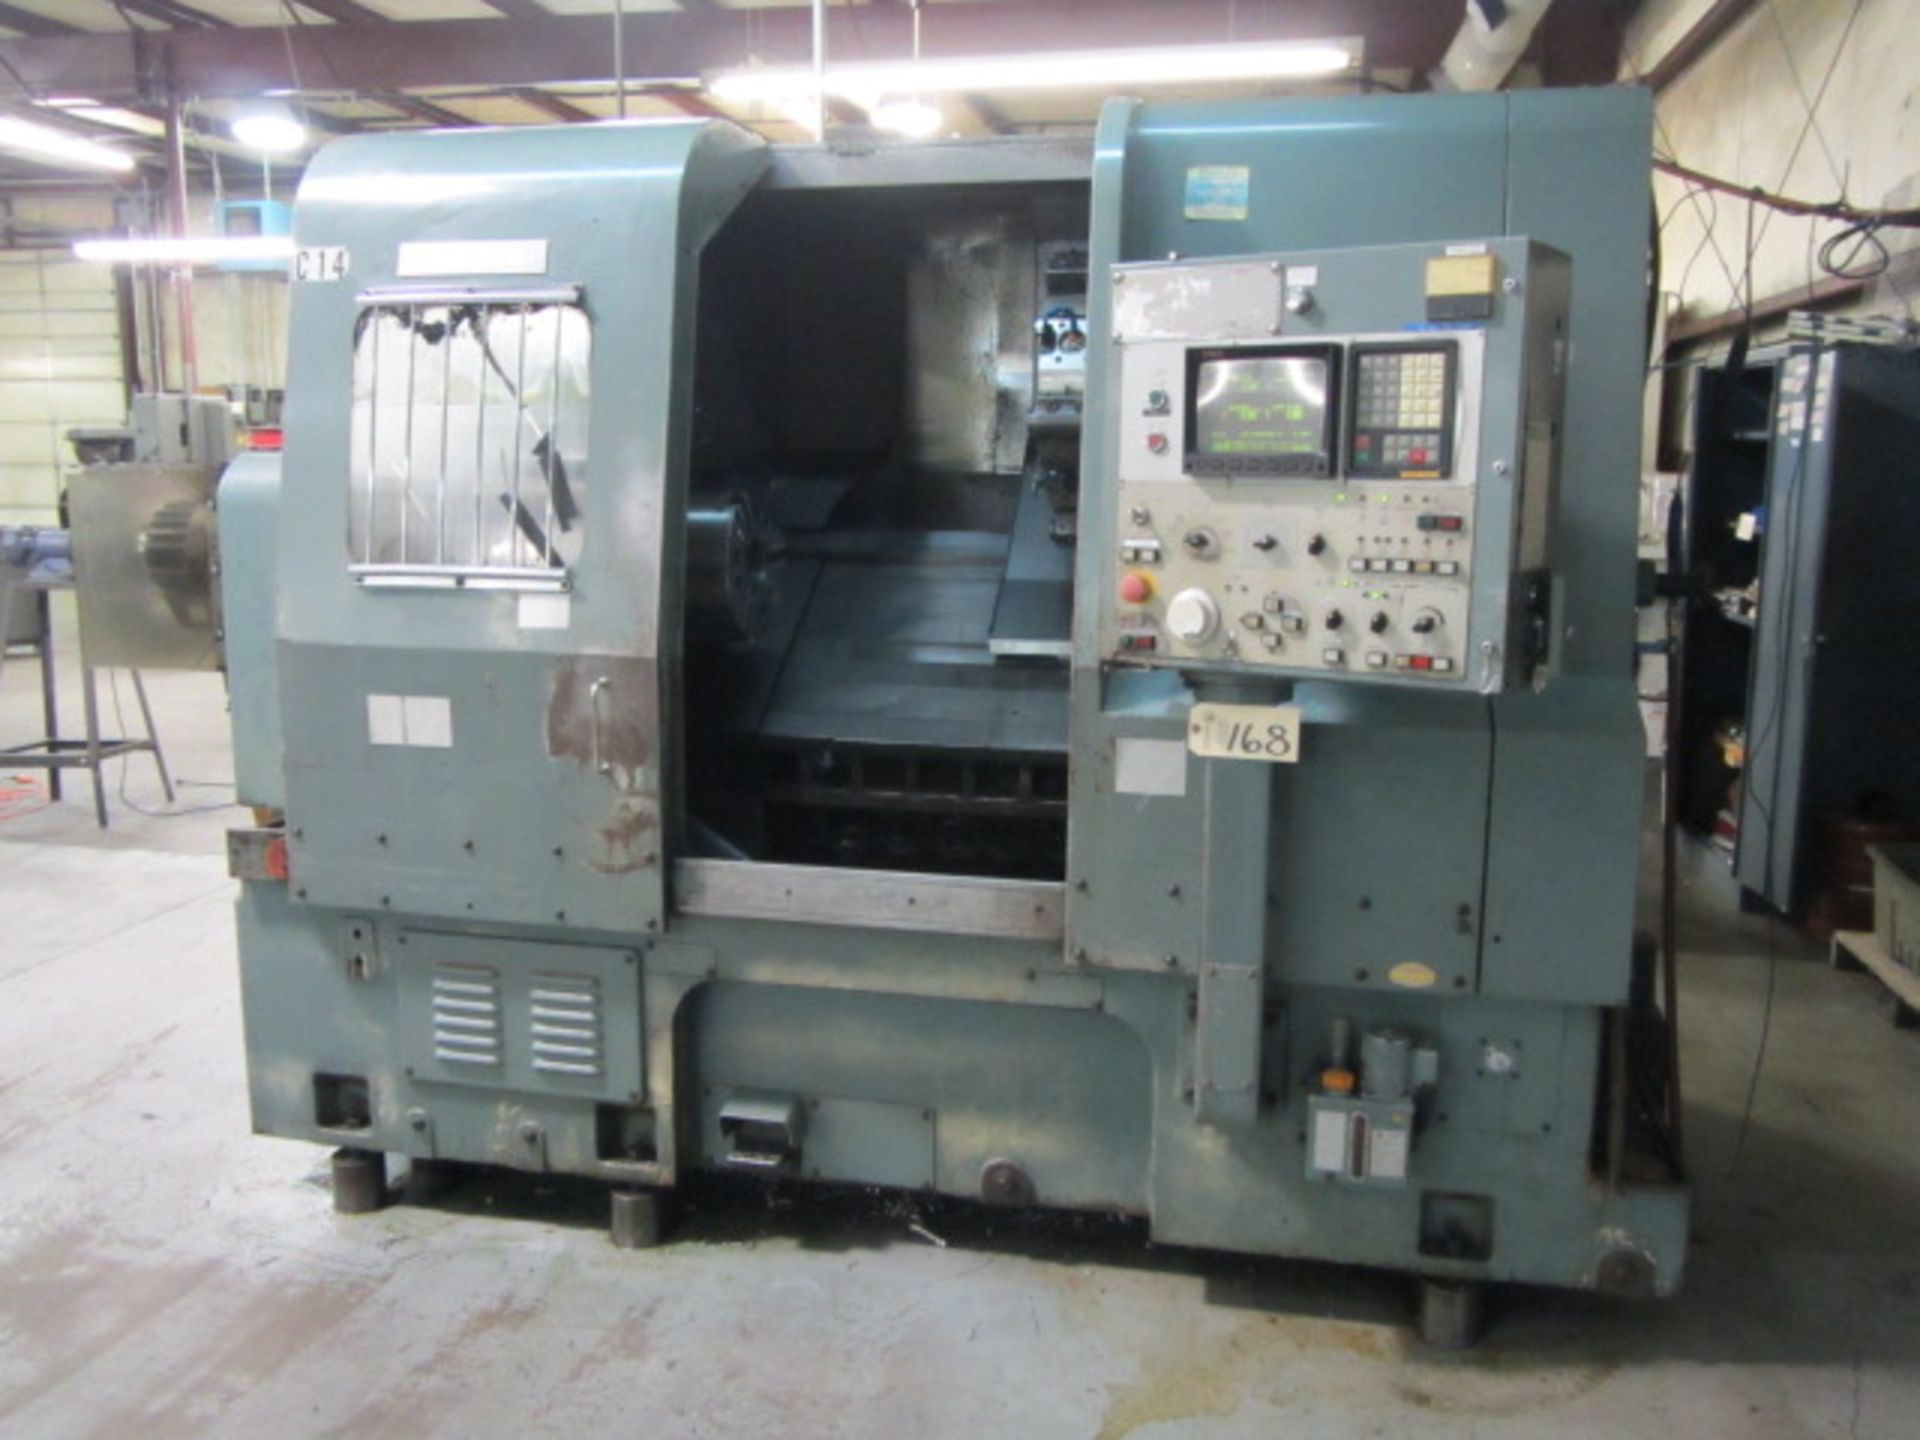 Mori Seiki SL-4 CNC Turning Center with 12'' 3-Jaw Power Chuck, 30'' Max Distance to Tailstock, - Image 3 of 10